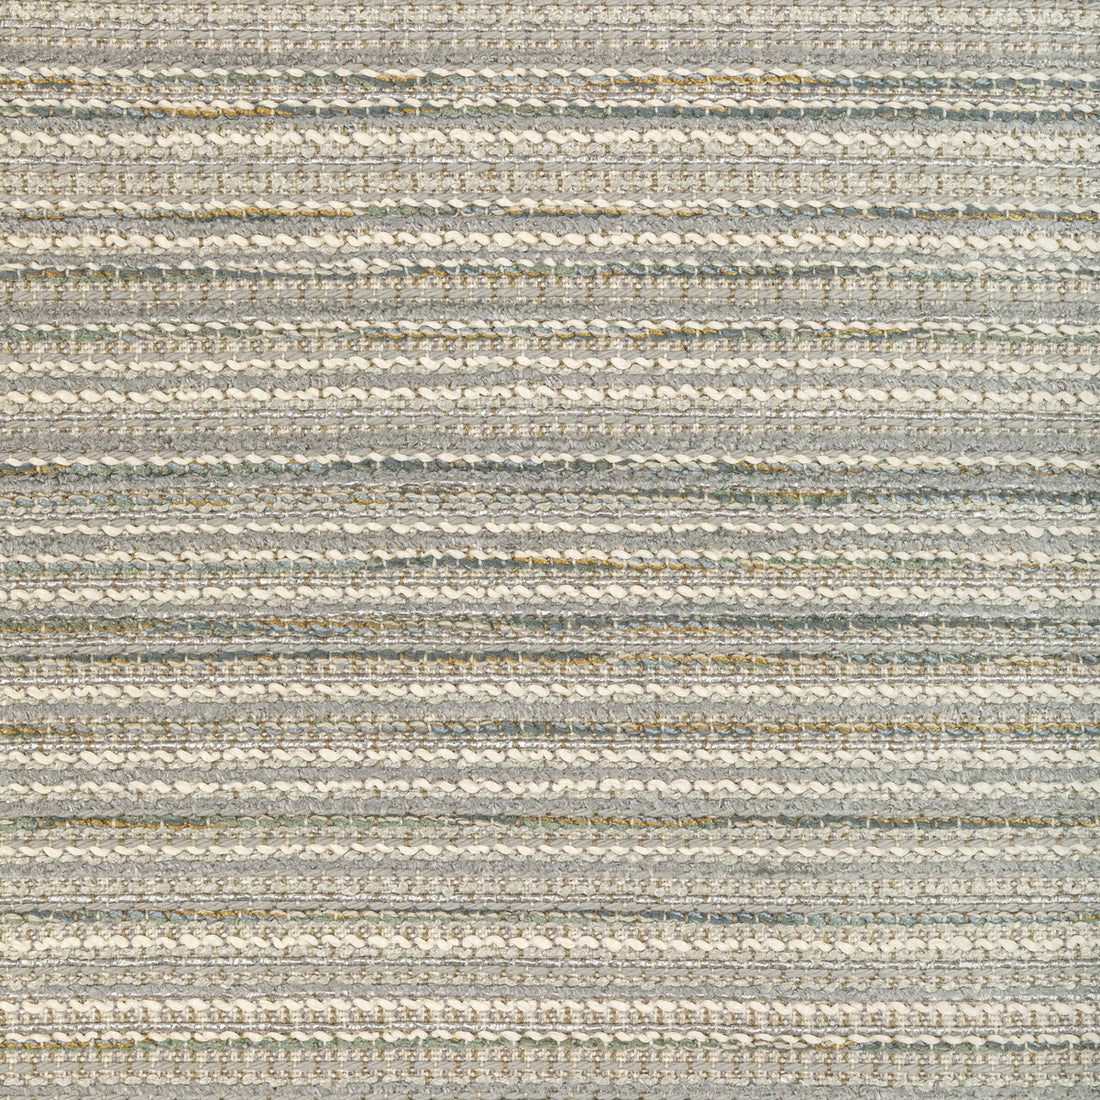 Kravet Design fabric in 36416-411 color - pattern 36416.411.0 - by Kravet Design in the Performance Crypton Home collection